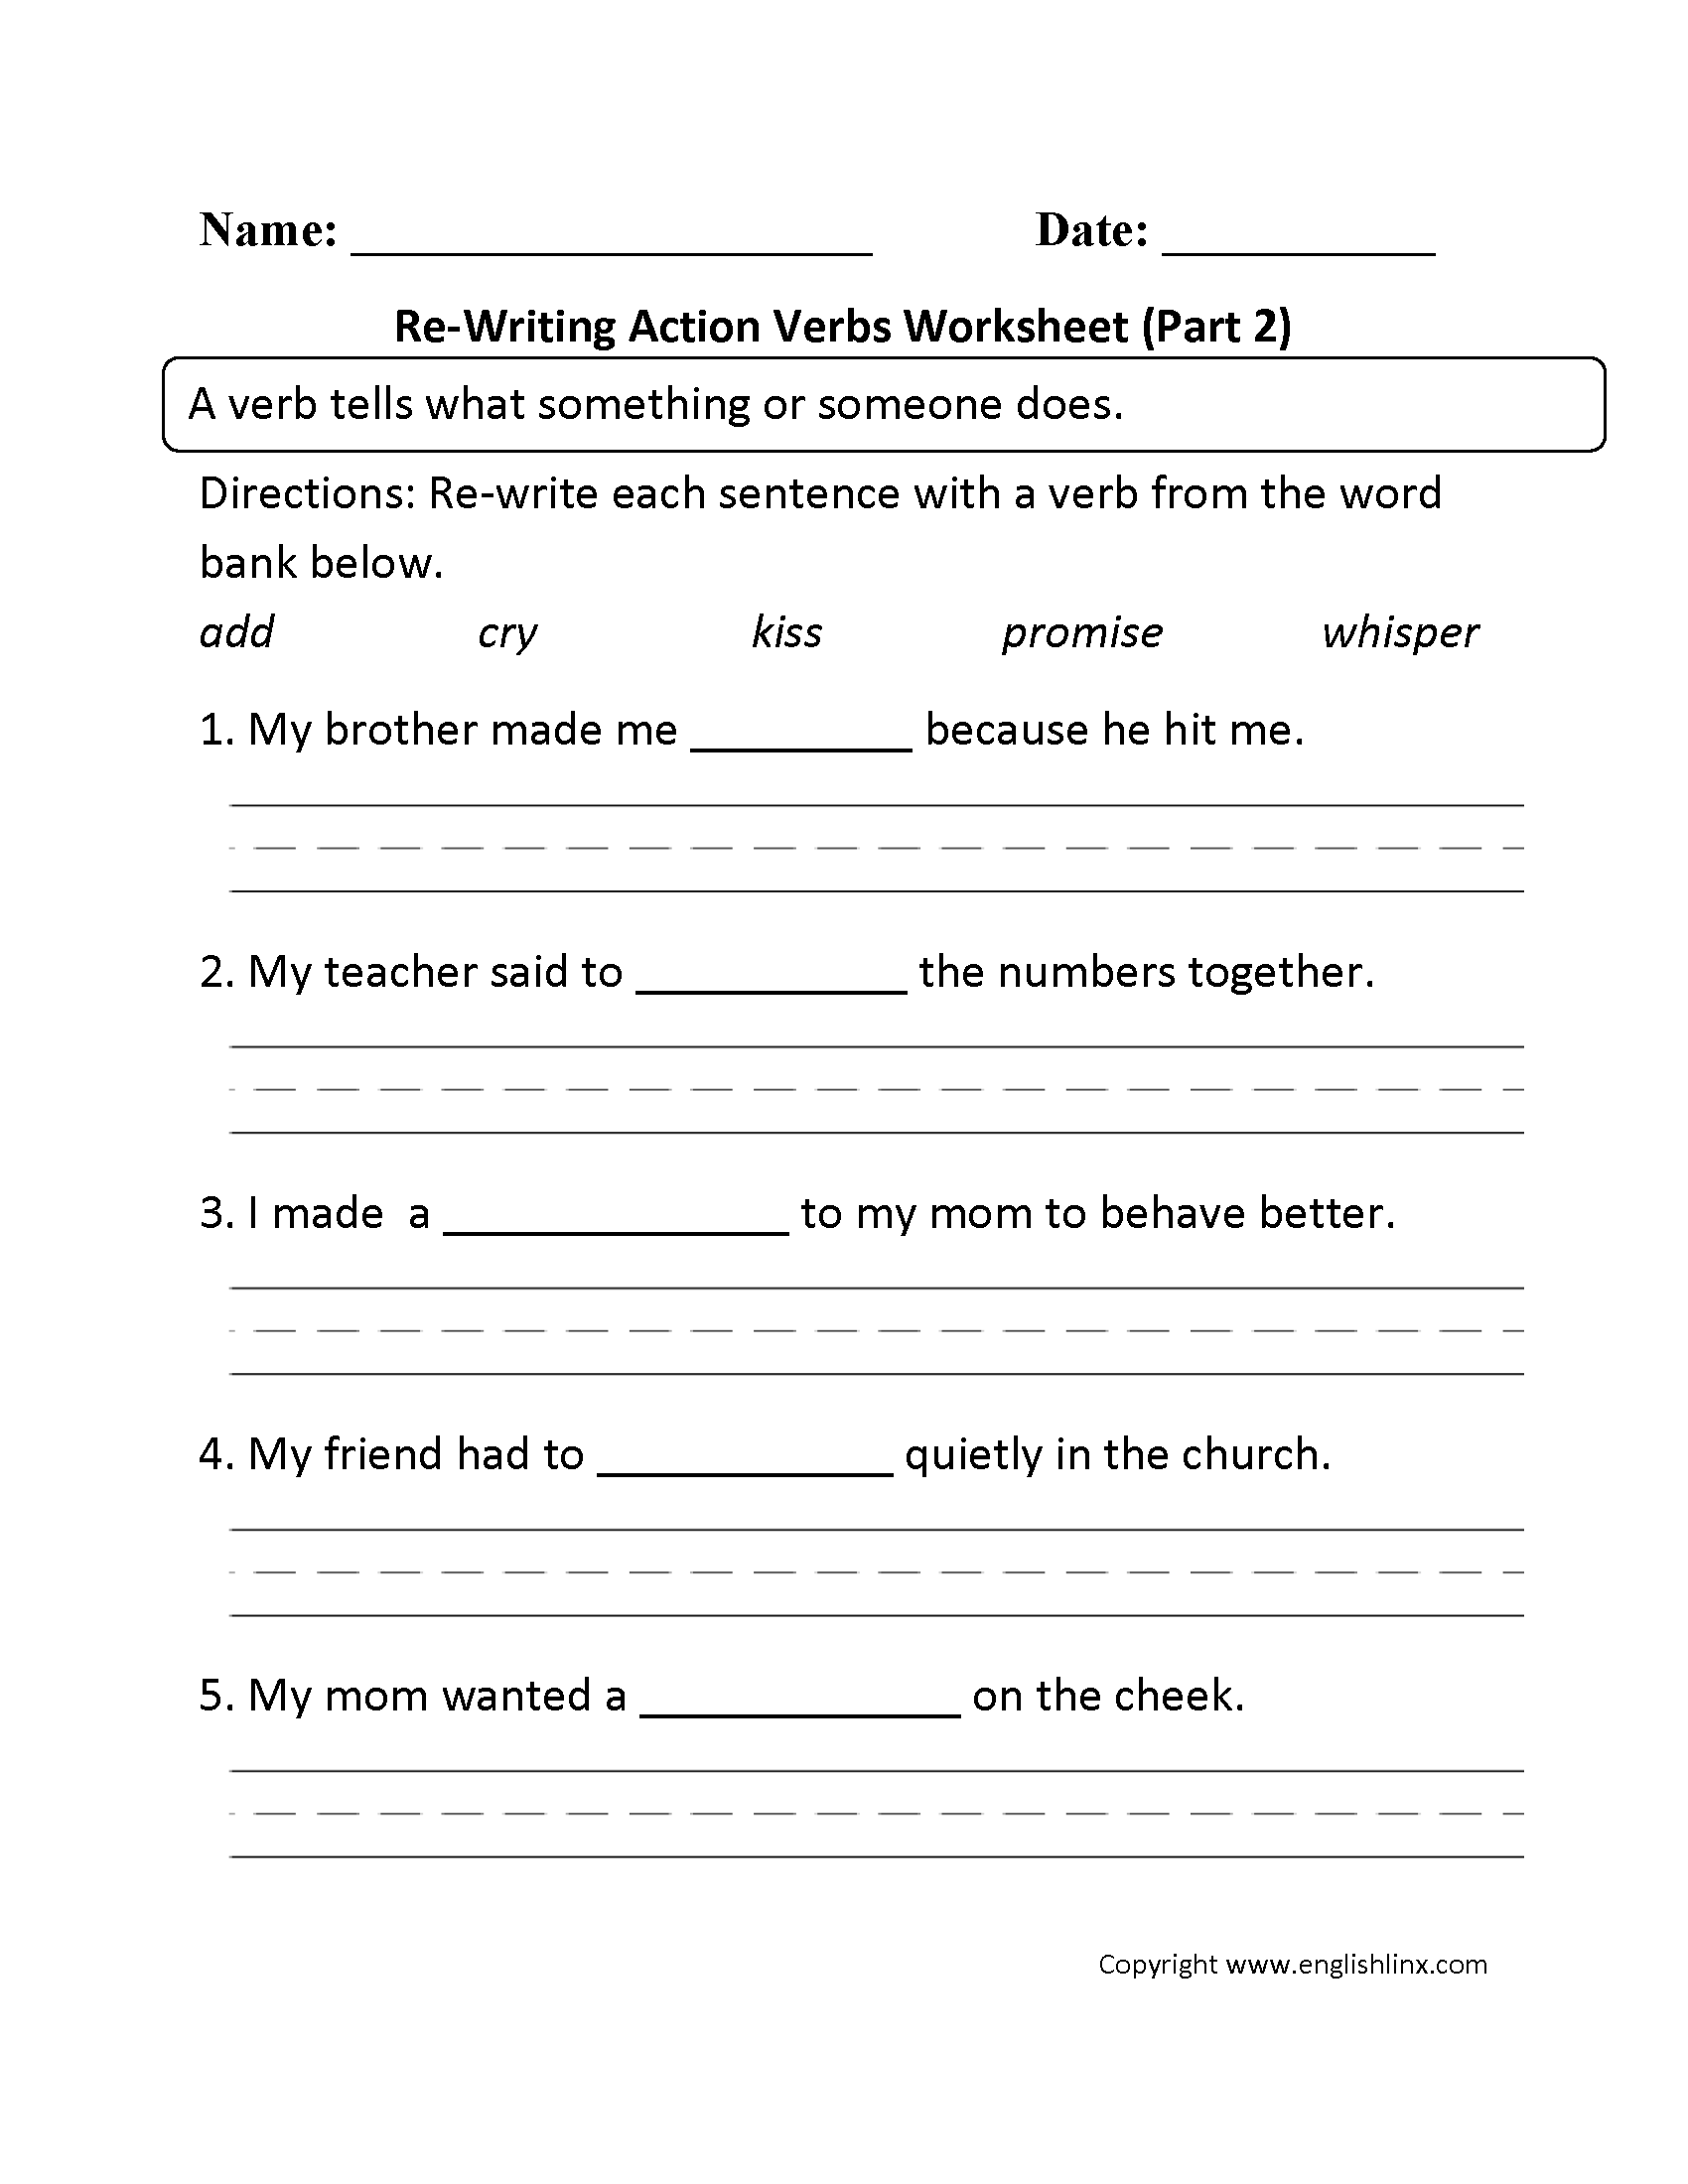 16 Best Images Of All Verbs Worksheets Grade 5 Mall Scavenger Hunt Party Future Tense Verbs